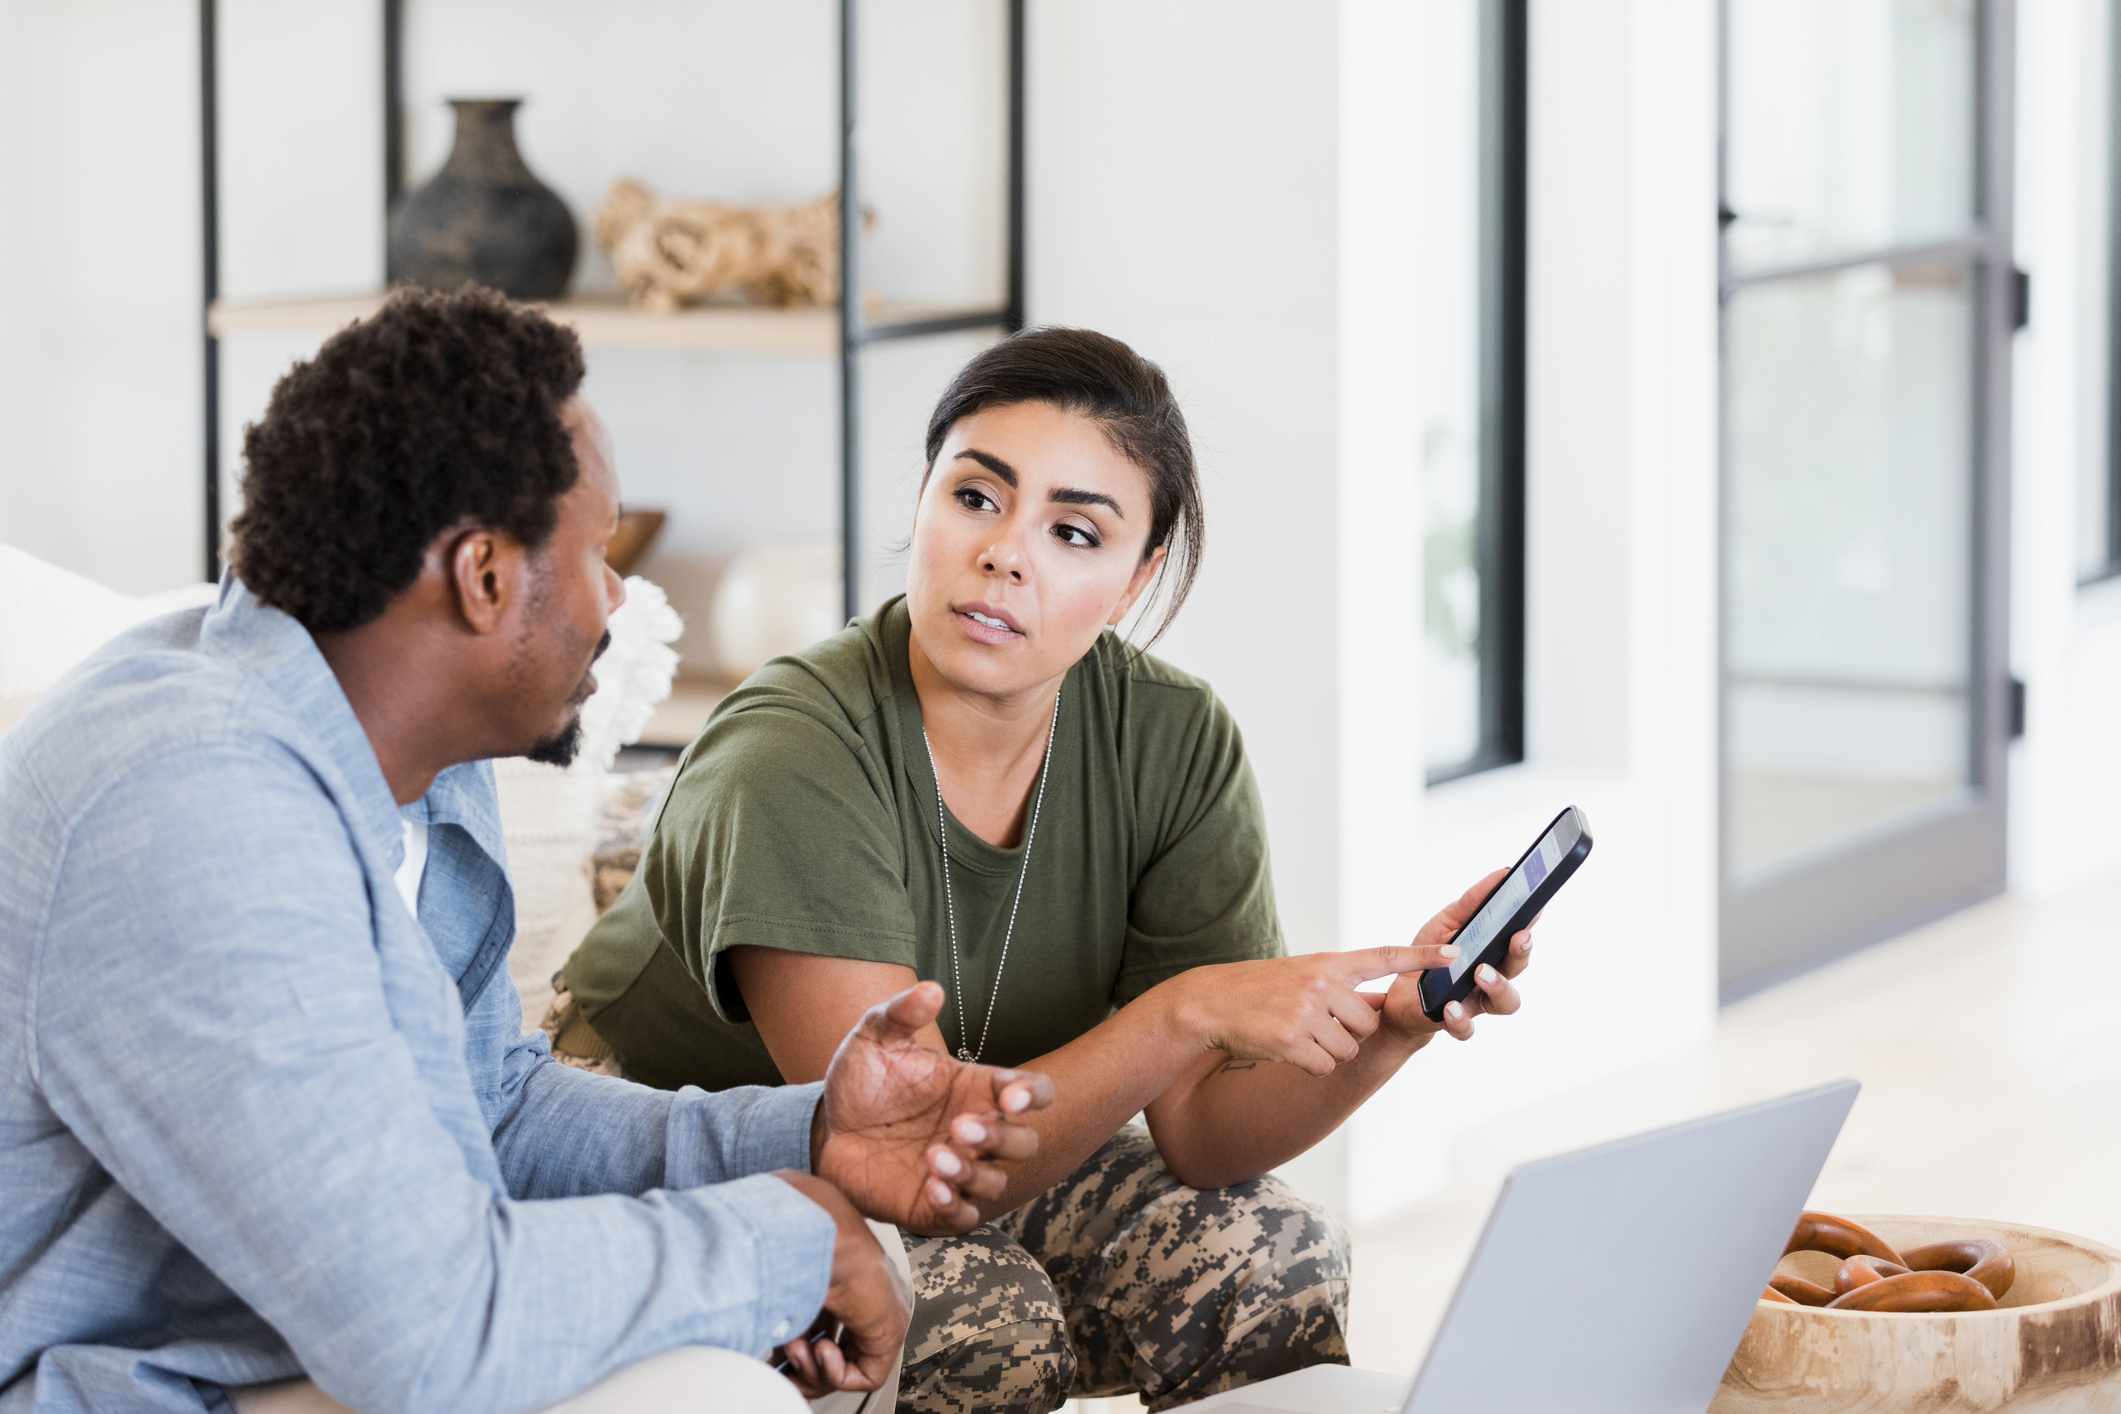 Sitting in their living room, the mid adult man gestures as he talks to his mid adult soldier wife about their home finances or an online purchase.  She is pointing to something on the smart phone screen and they have their laptop on the coffee table in front of them.